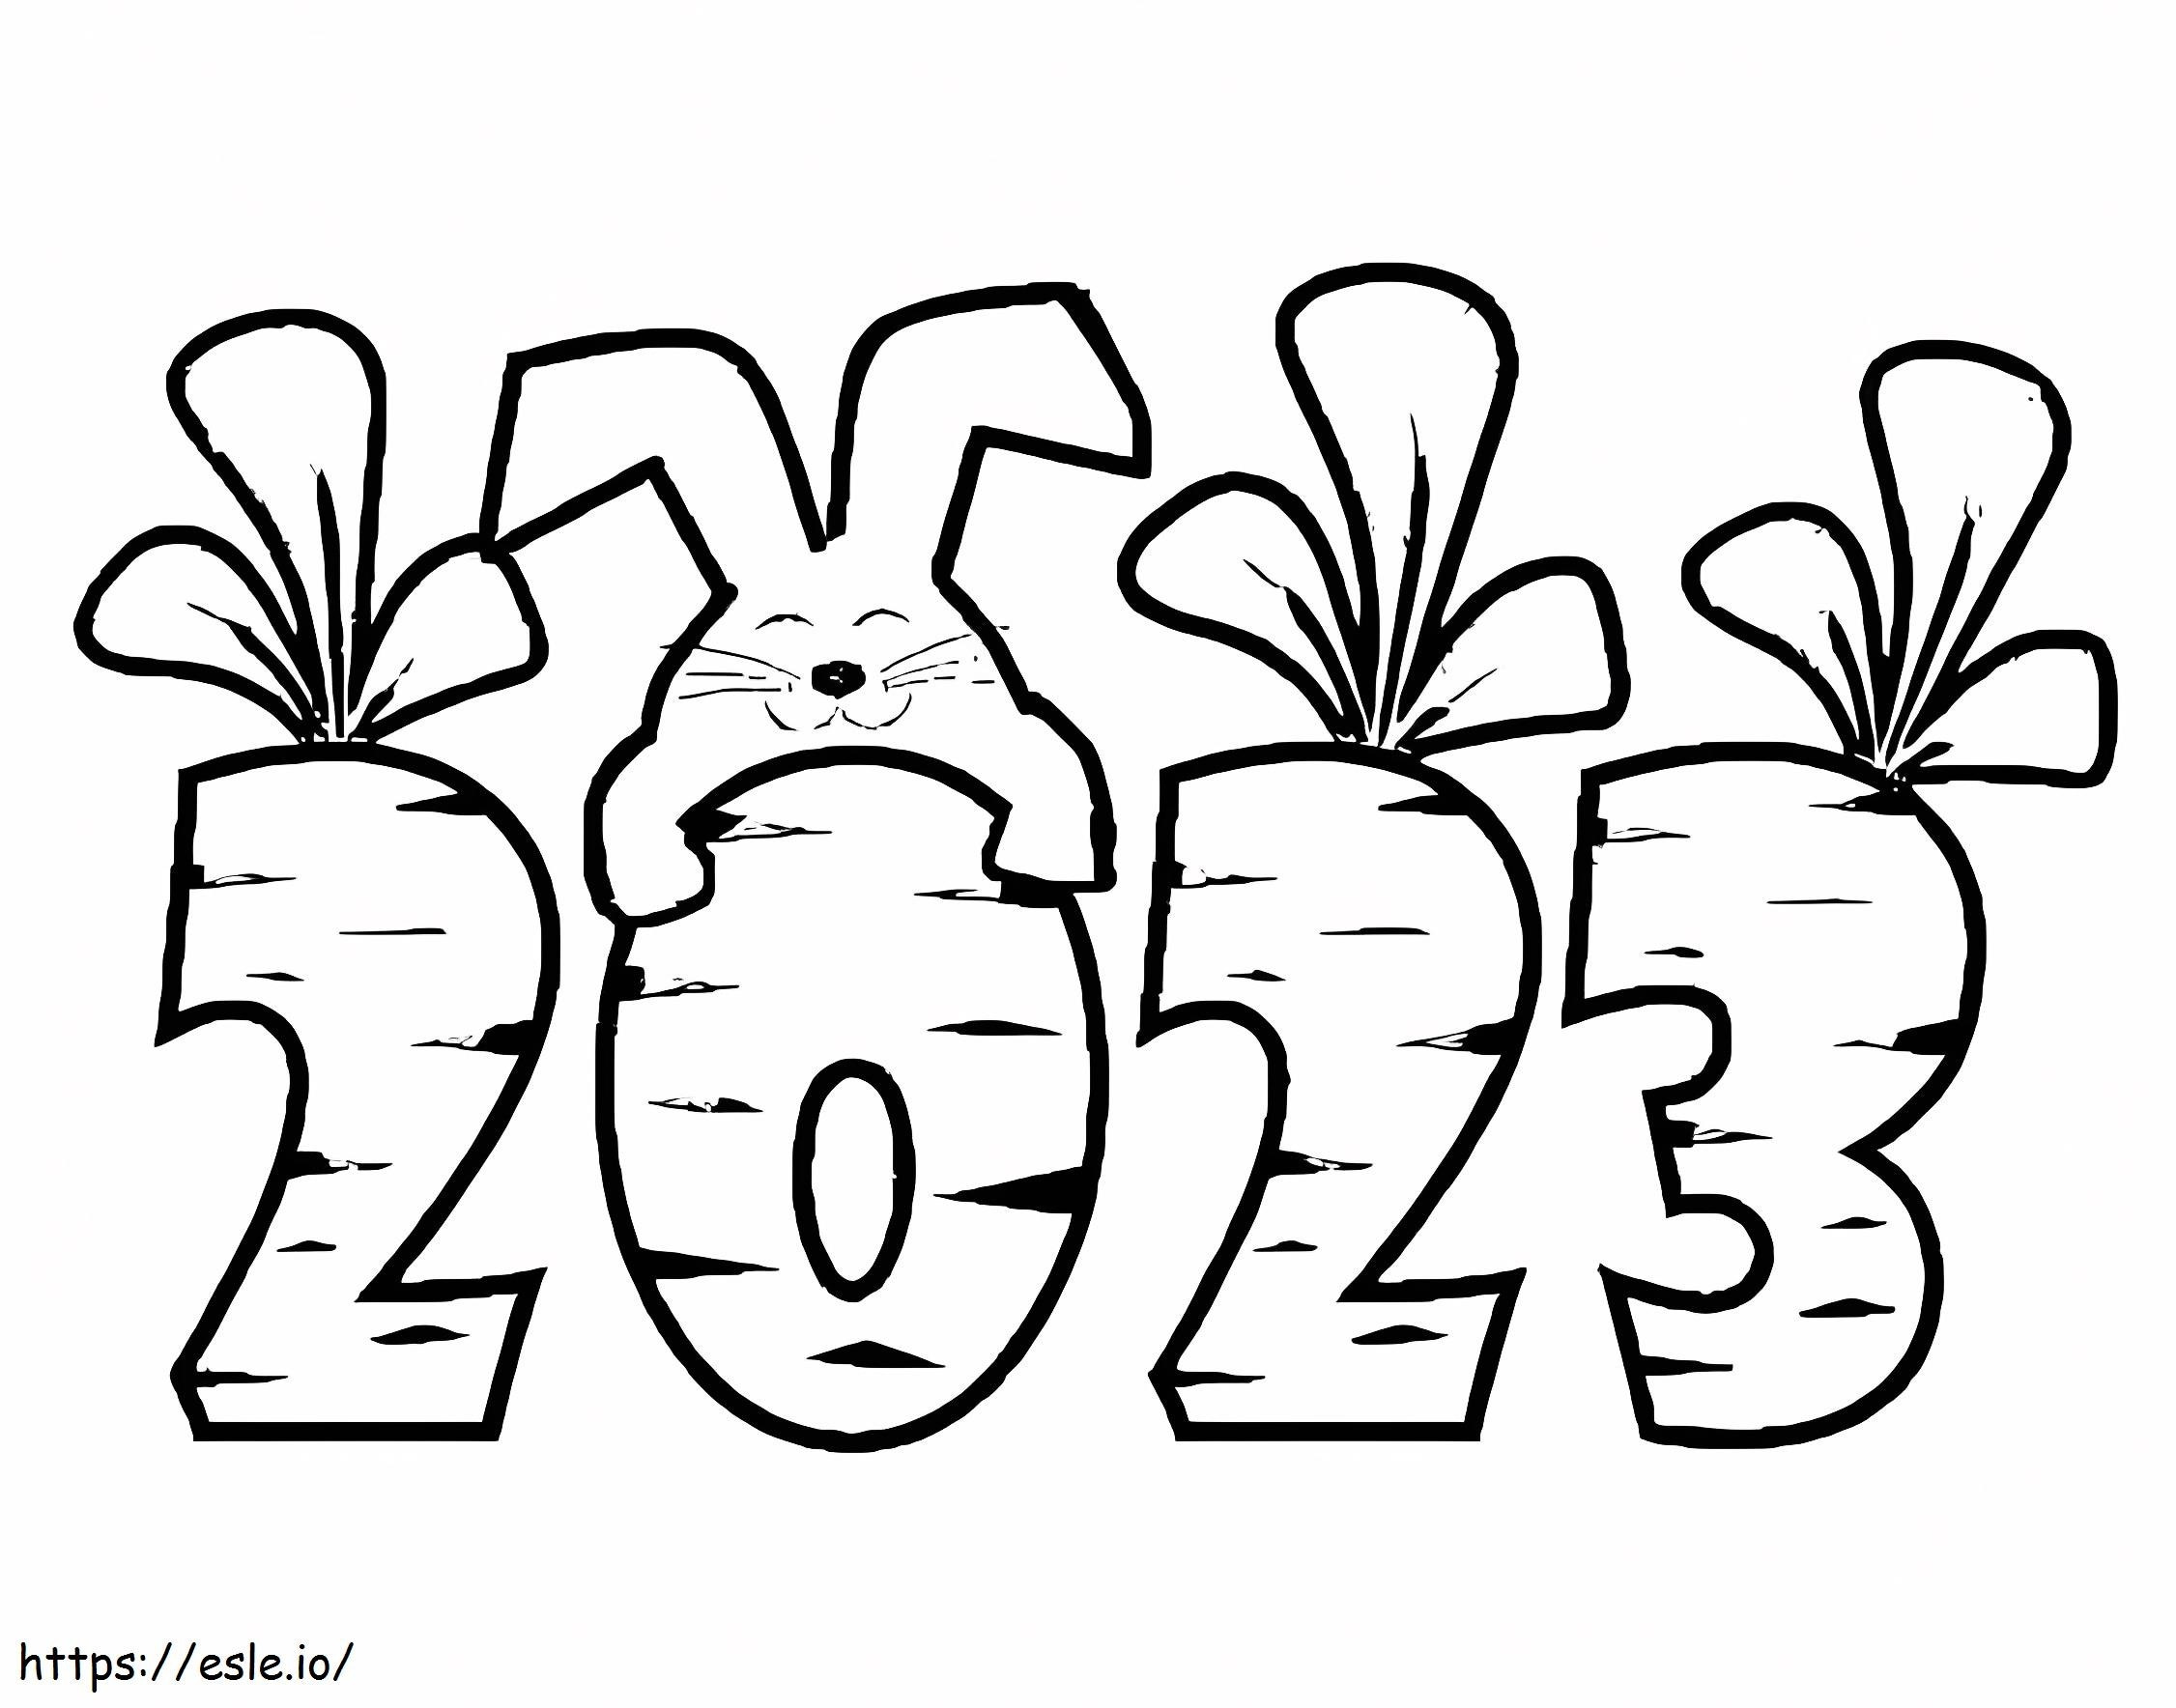 Year 2023 With Rabbit coloring page